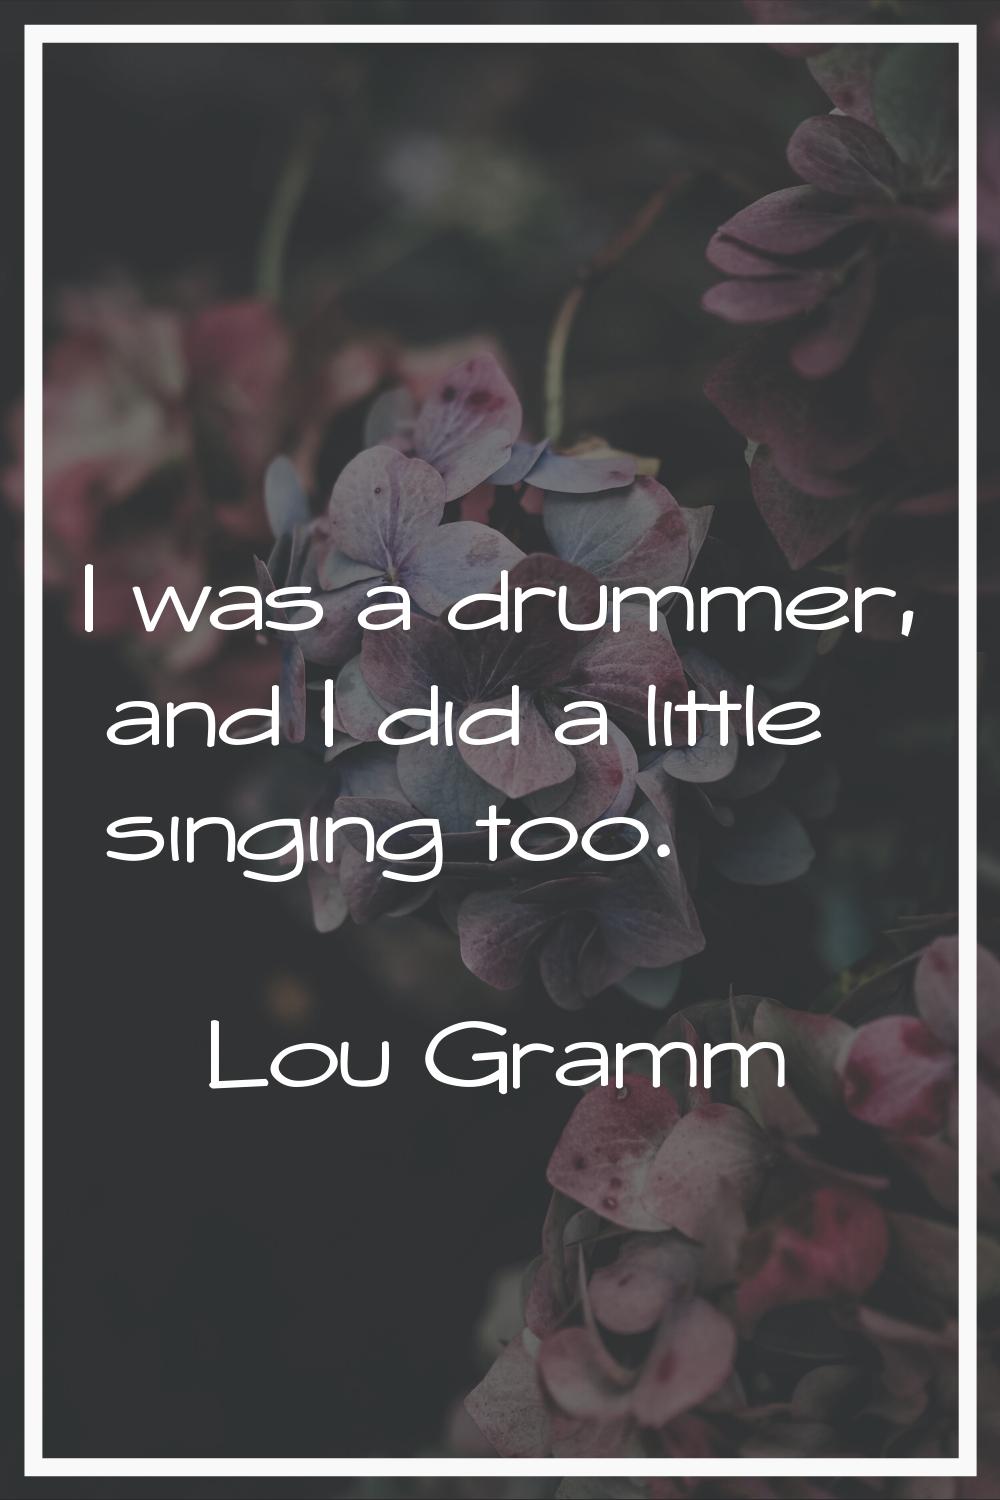 I was a drummer, and I did a little singing too.